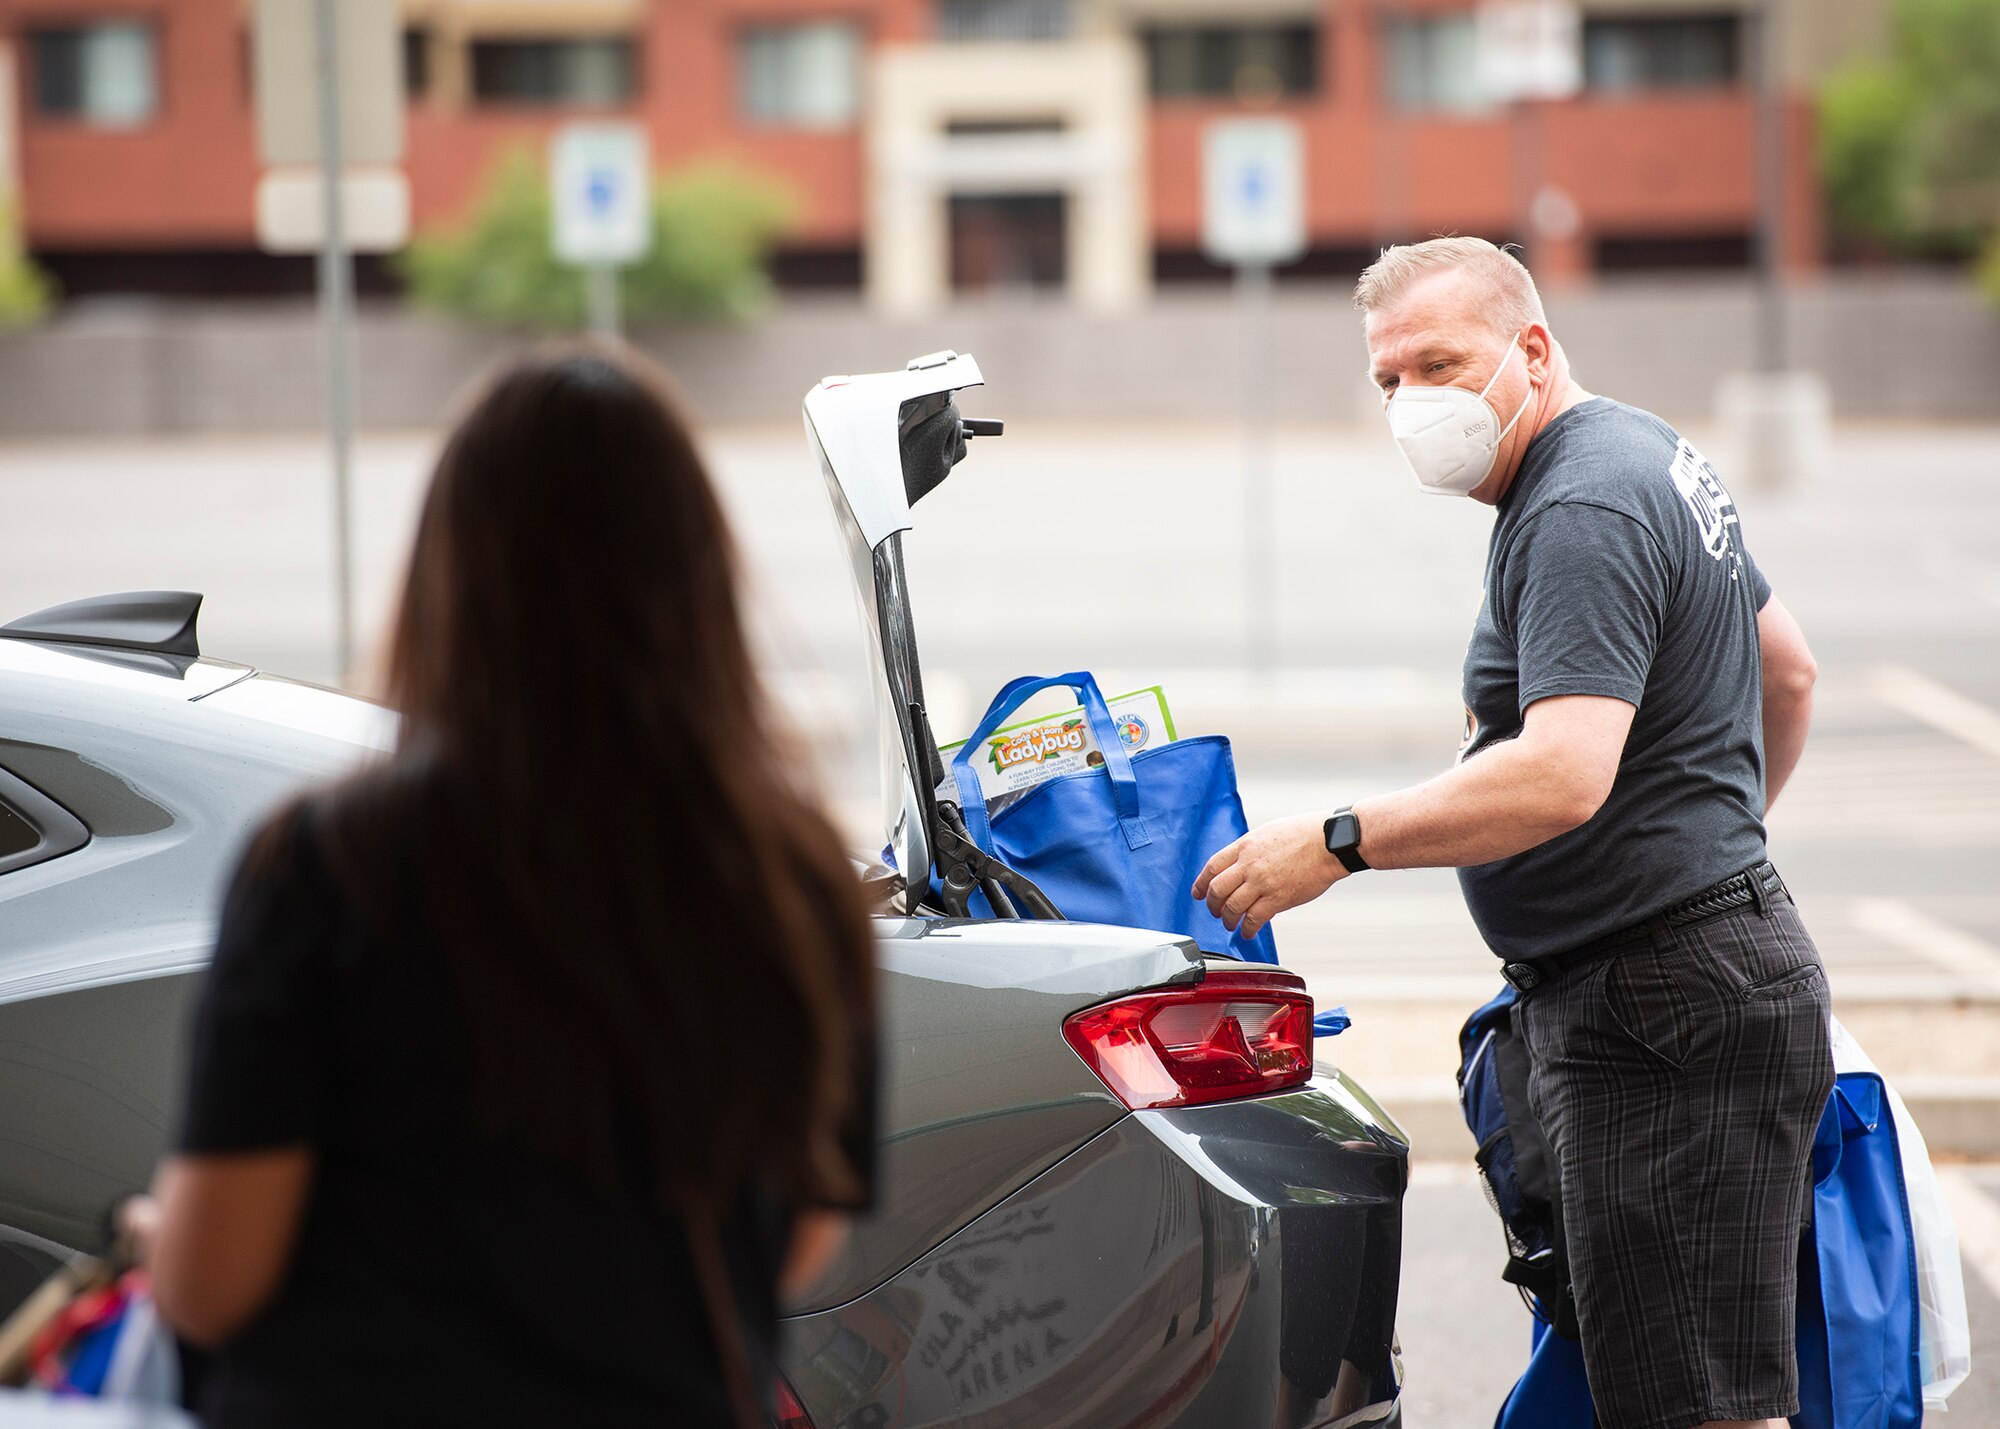 Jimbo Norton, Back to School Bash volunteer and 56th Communication Squadron resource advisor, loads a car during the Back to School Bash drive-thru July 23, 2020, at the Gila Bend Arena in Glendale, Ariz.